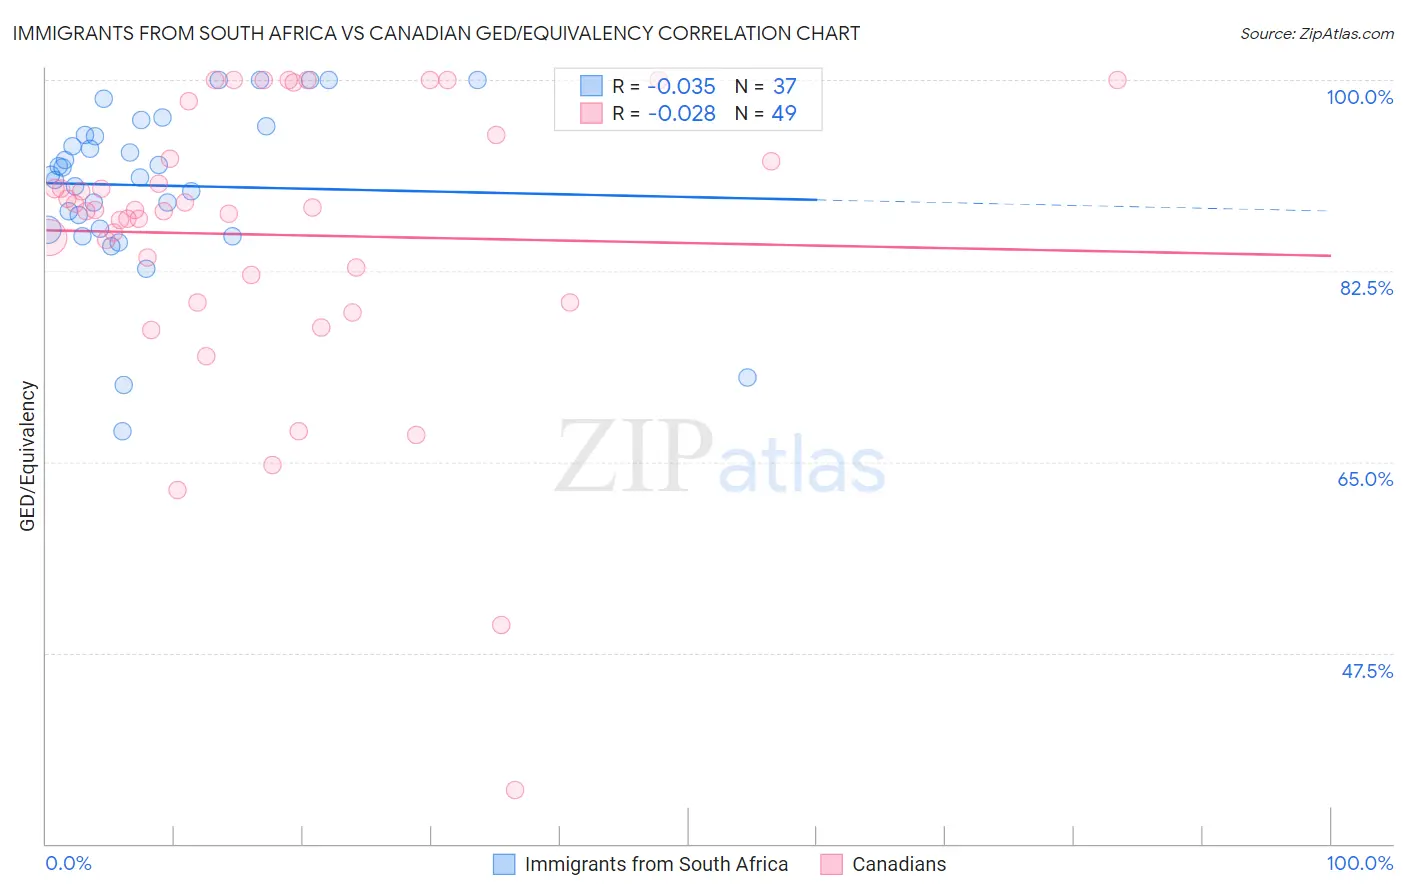 Immigrants from South Africa vs Canadian GED/Equivalency